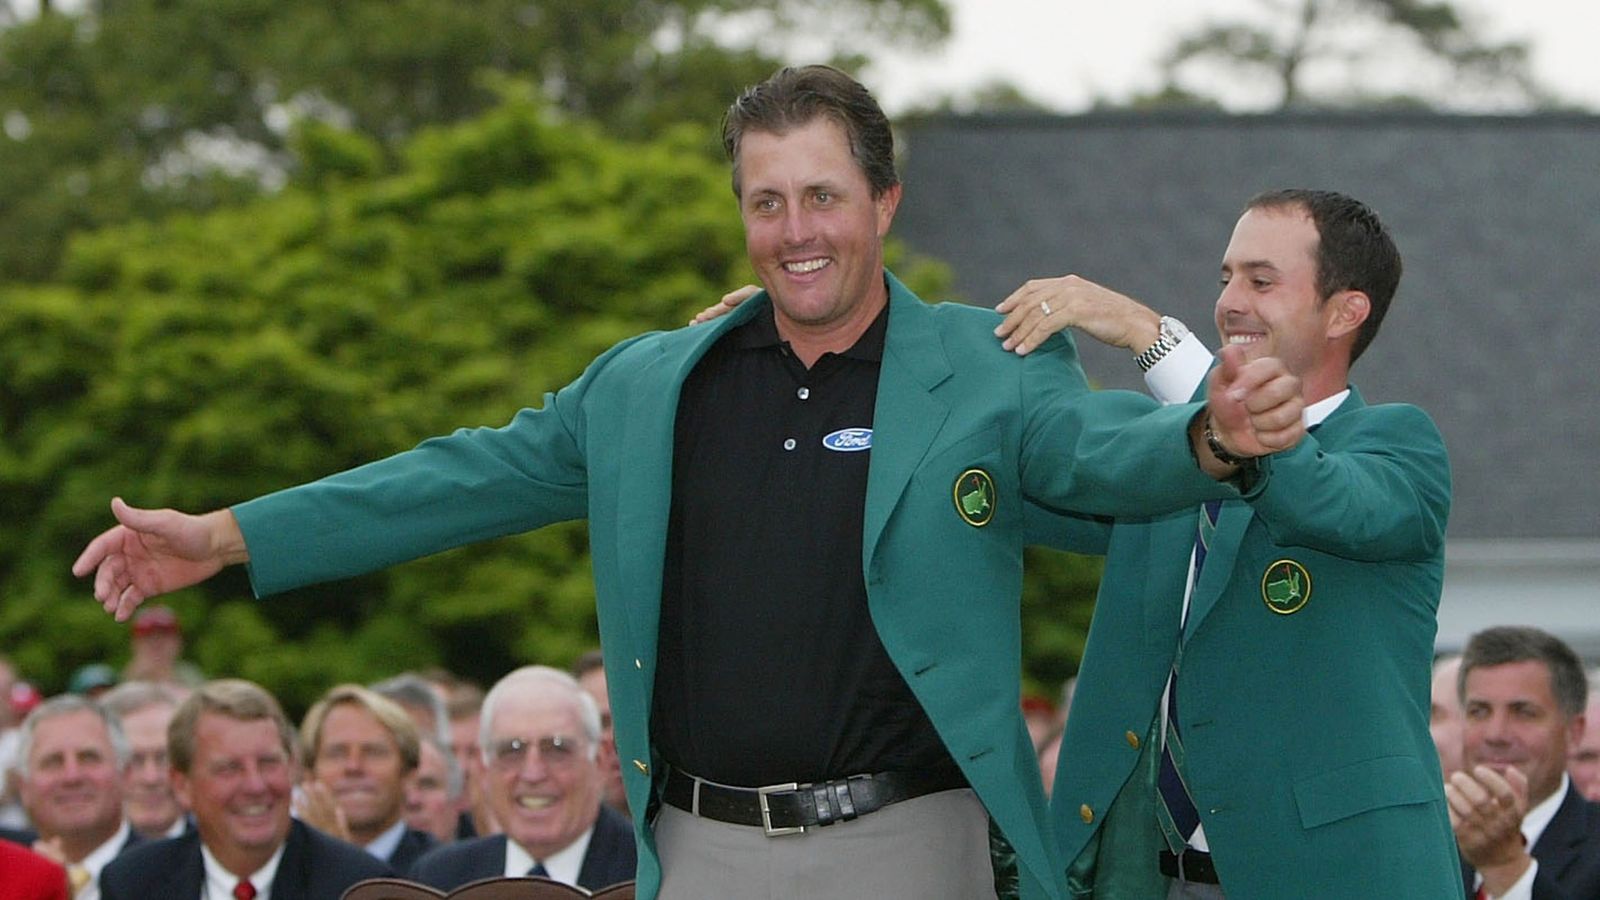 Phil Mickelson Simply Too Much For Mike Weir At Dominion